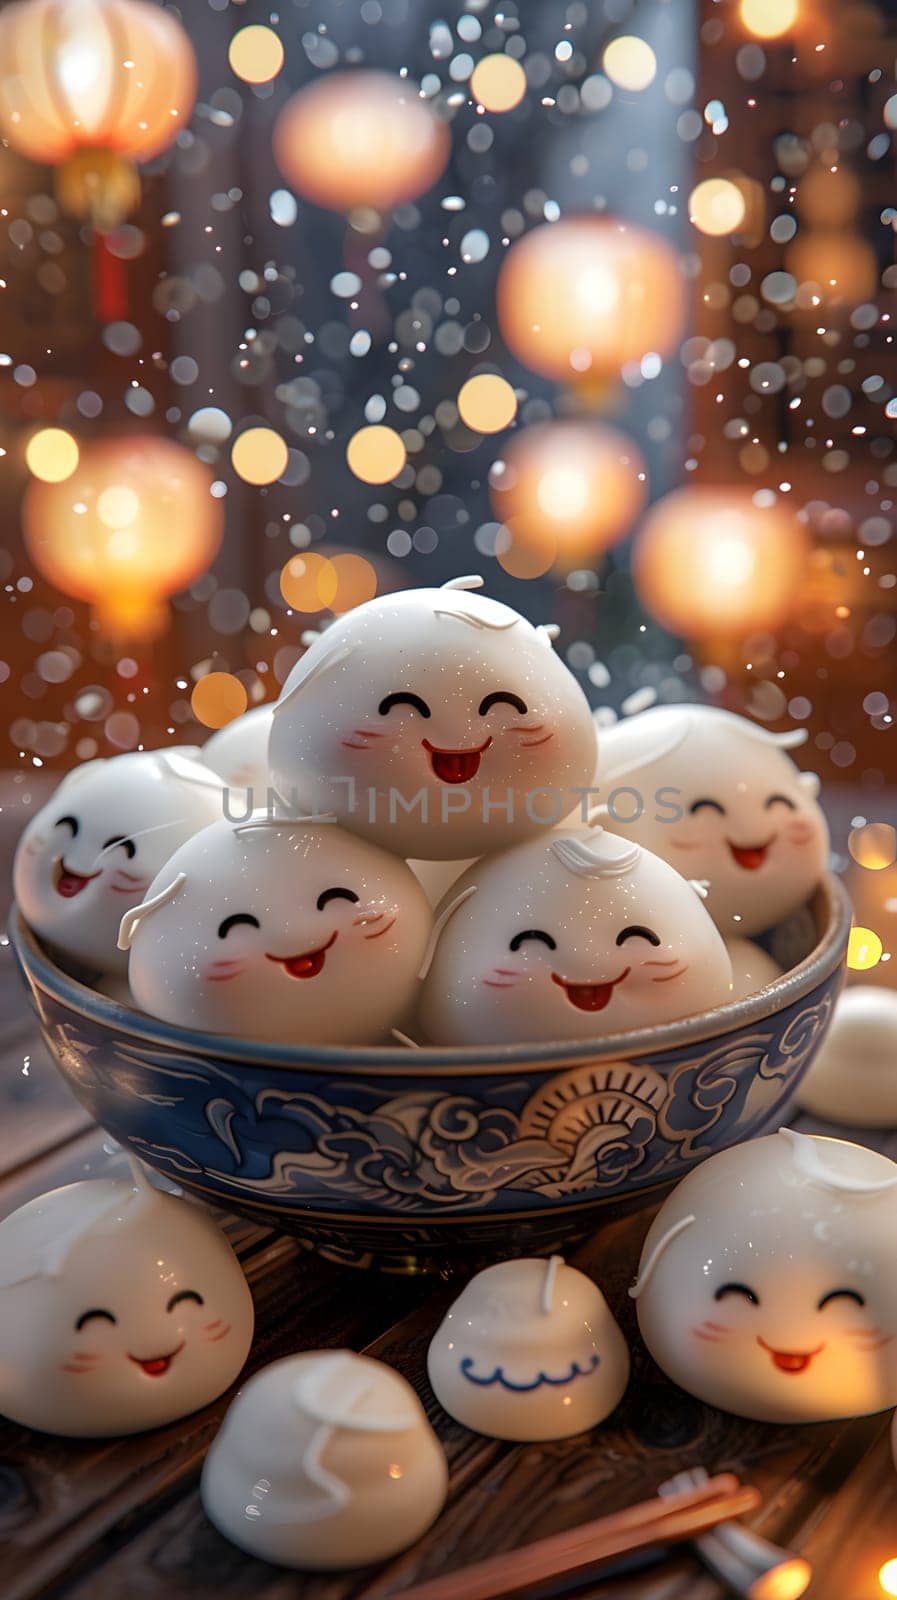 Snapshot of a white mammal dumpling dish with faces on a table by Nadtochiy